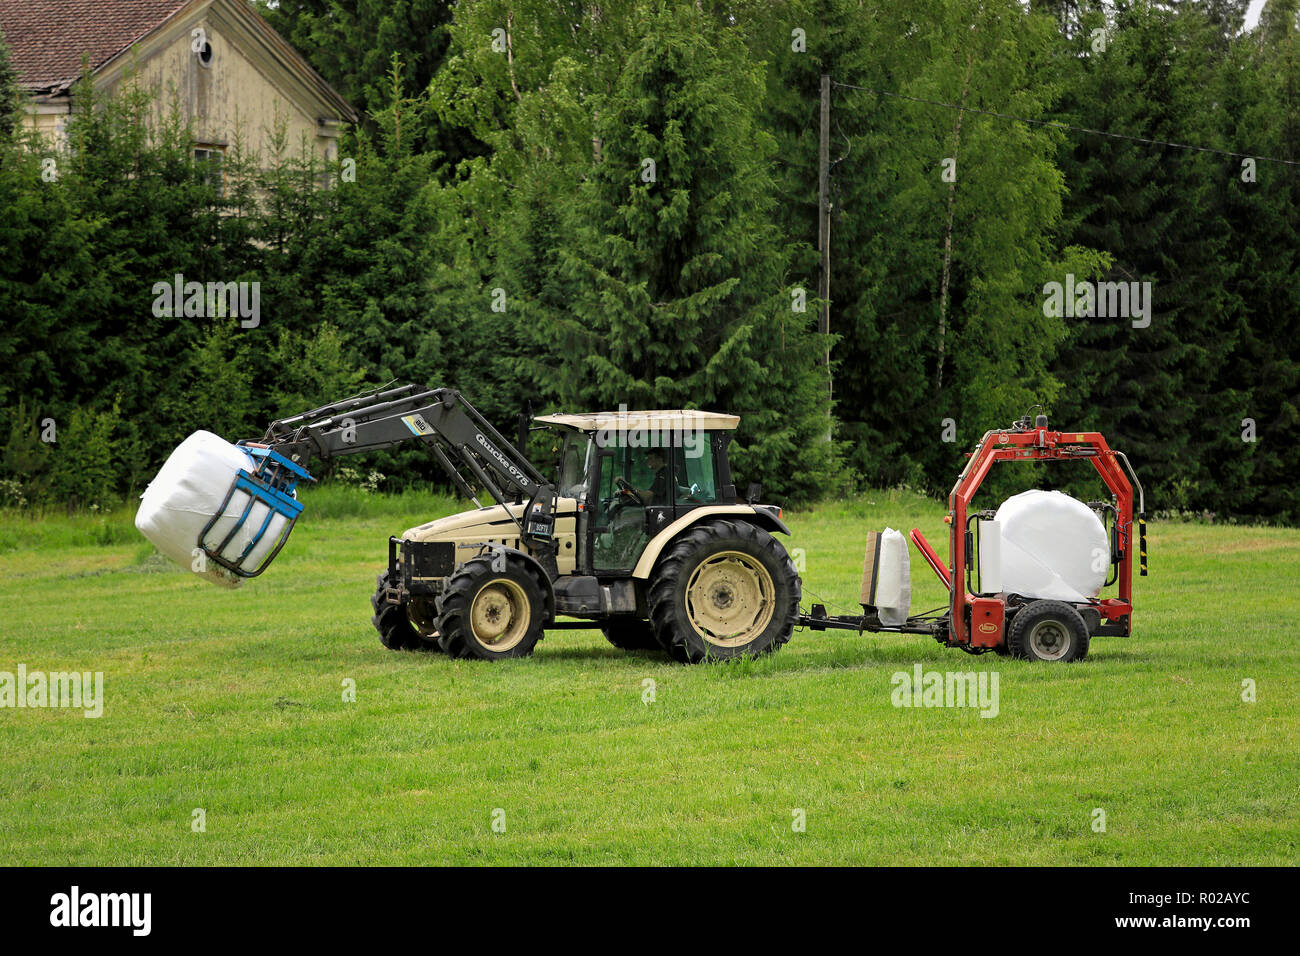 Uurainen, Finland - June 15, 2018: Farmer hauls wrapped hay bales with Quicke front end loader on Lamborghini tractor and Vicon BV 1700 wrapper. Stock Photo